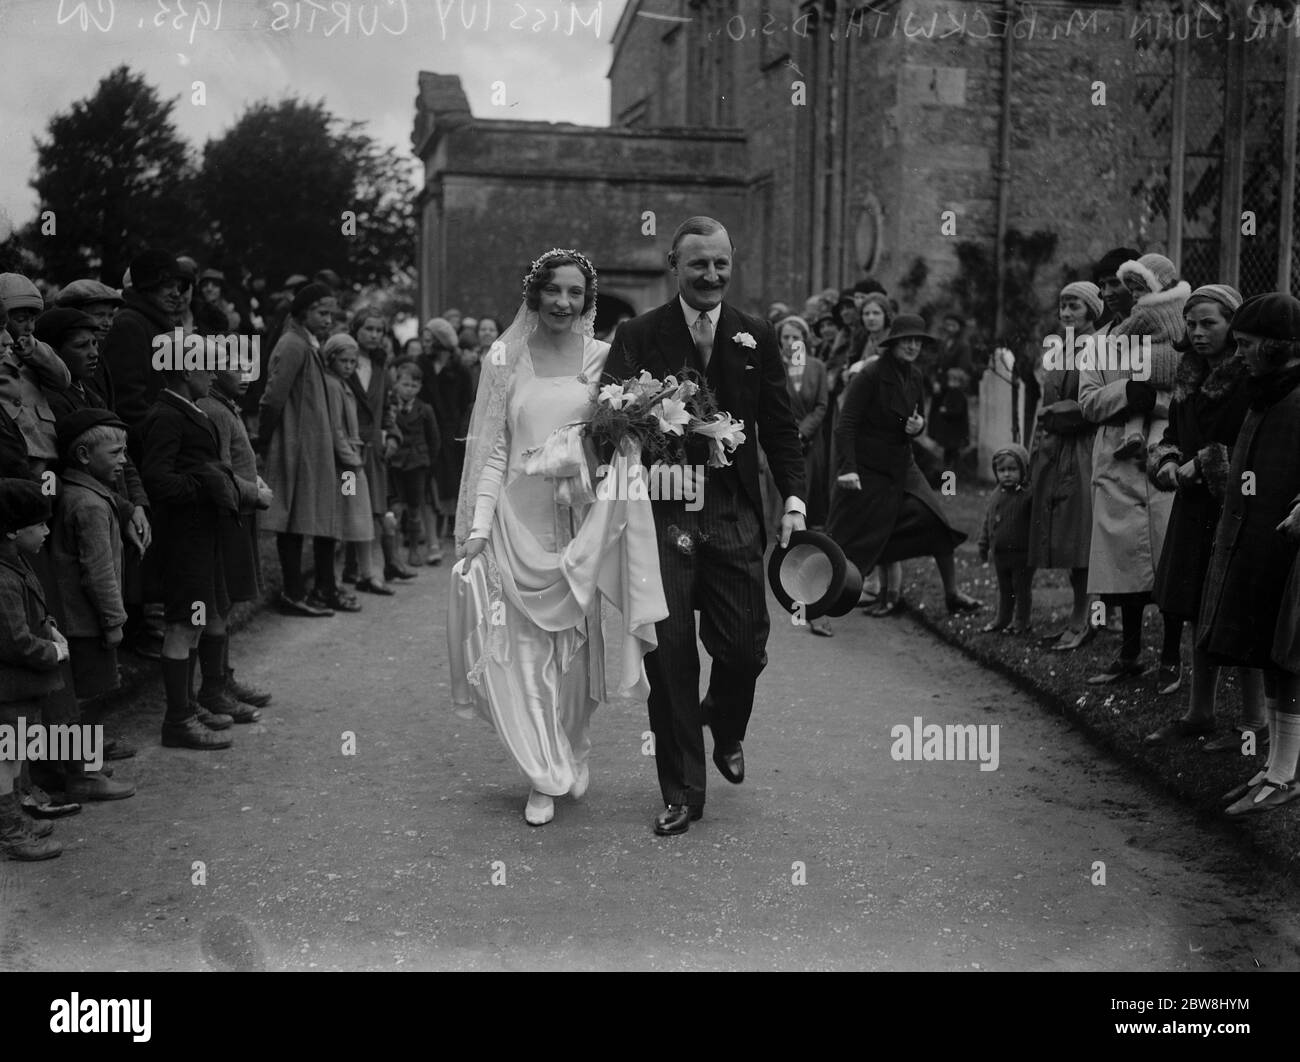 Duke 's nephew weds Viscount 's granddaughter . The marriage between John M Beckwith , DSC , and Miss Ivy Curtis , at Shrivington . The bride and bridegroom . 10 May 1933 Stock Photo